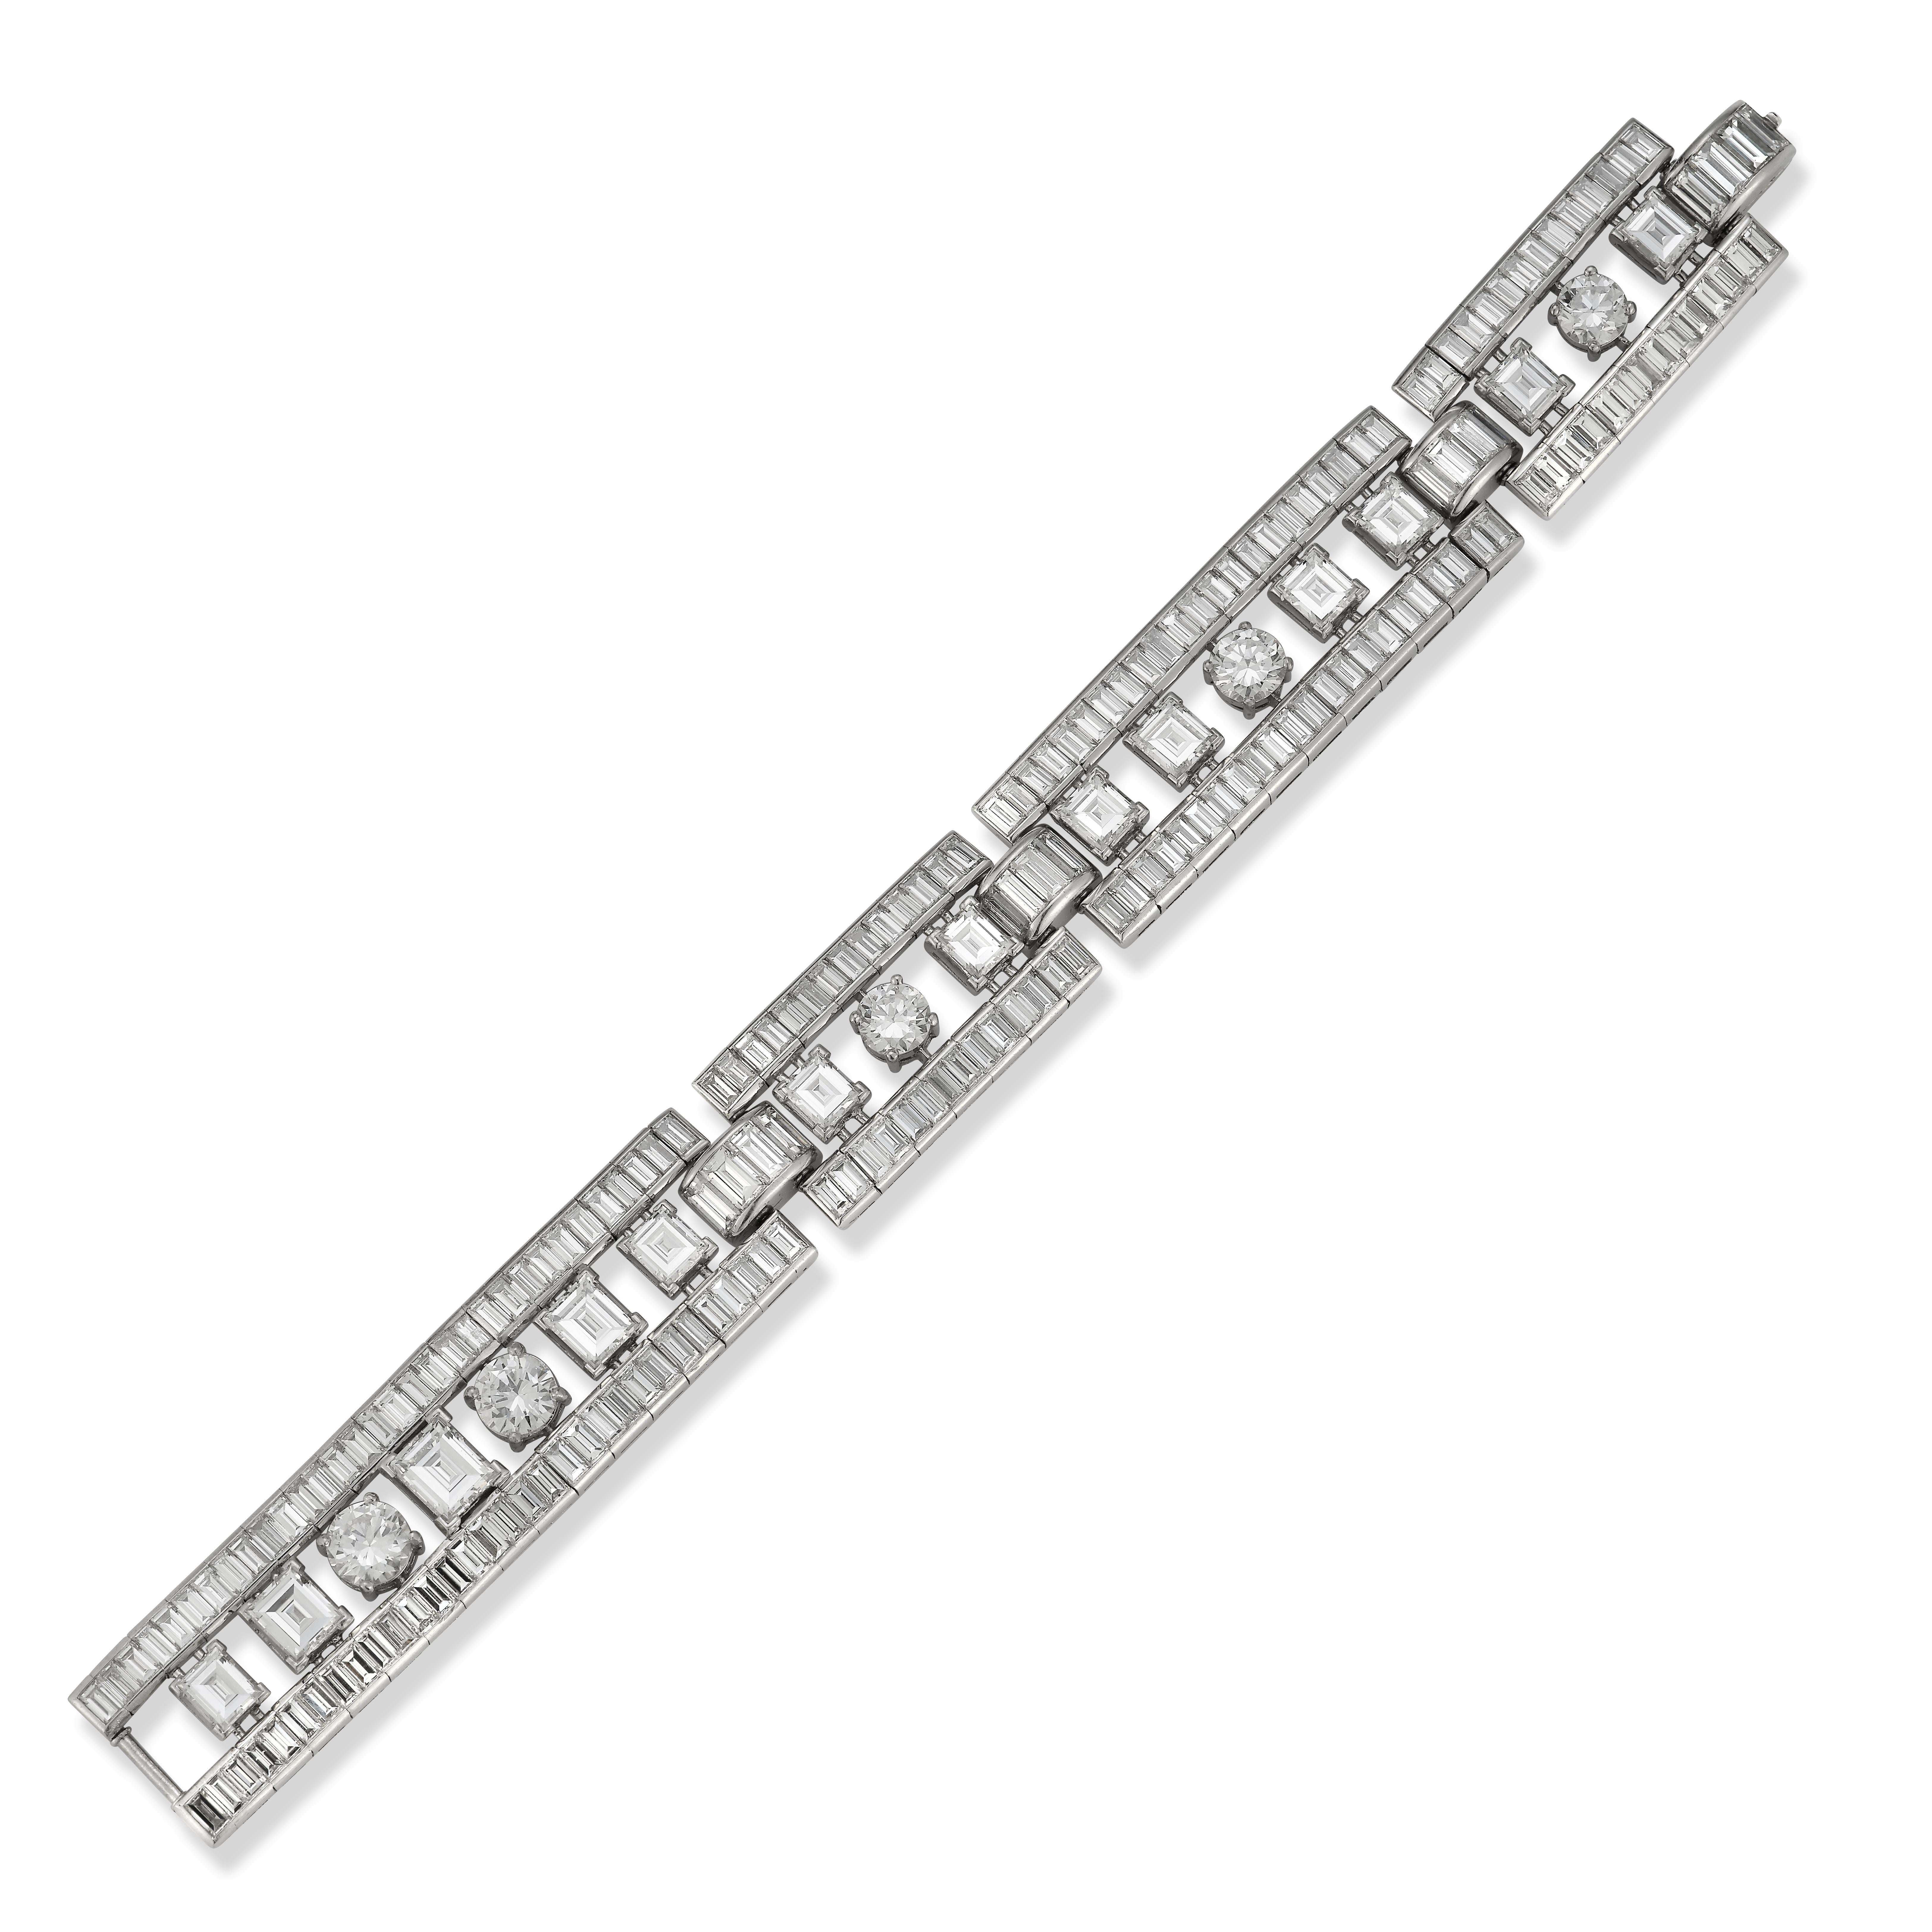 Diamond Bracelet with 3 GIA certificates for 3 separate diamonds, set in Platinum. 
Total Carat Weight: 30.53 Cts
3 Round Brilliant Cut Diamonds Based on GIA Reports 
Diamond Weights:
1 Round Cut: 1.10 Cts ( Color: G  , Clarity: VVS2)  GIA Report#: